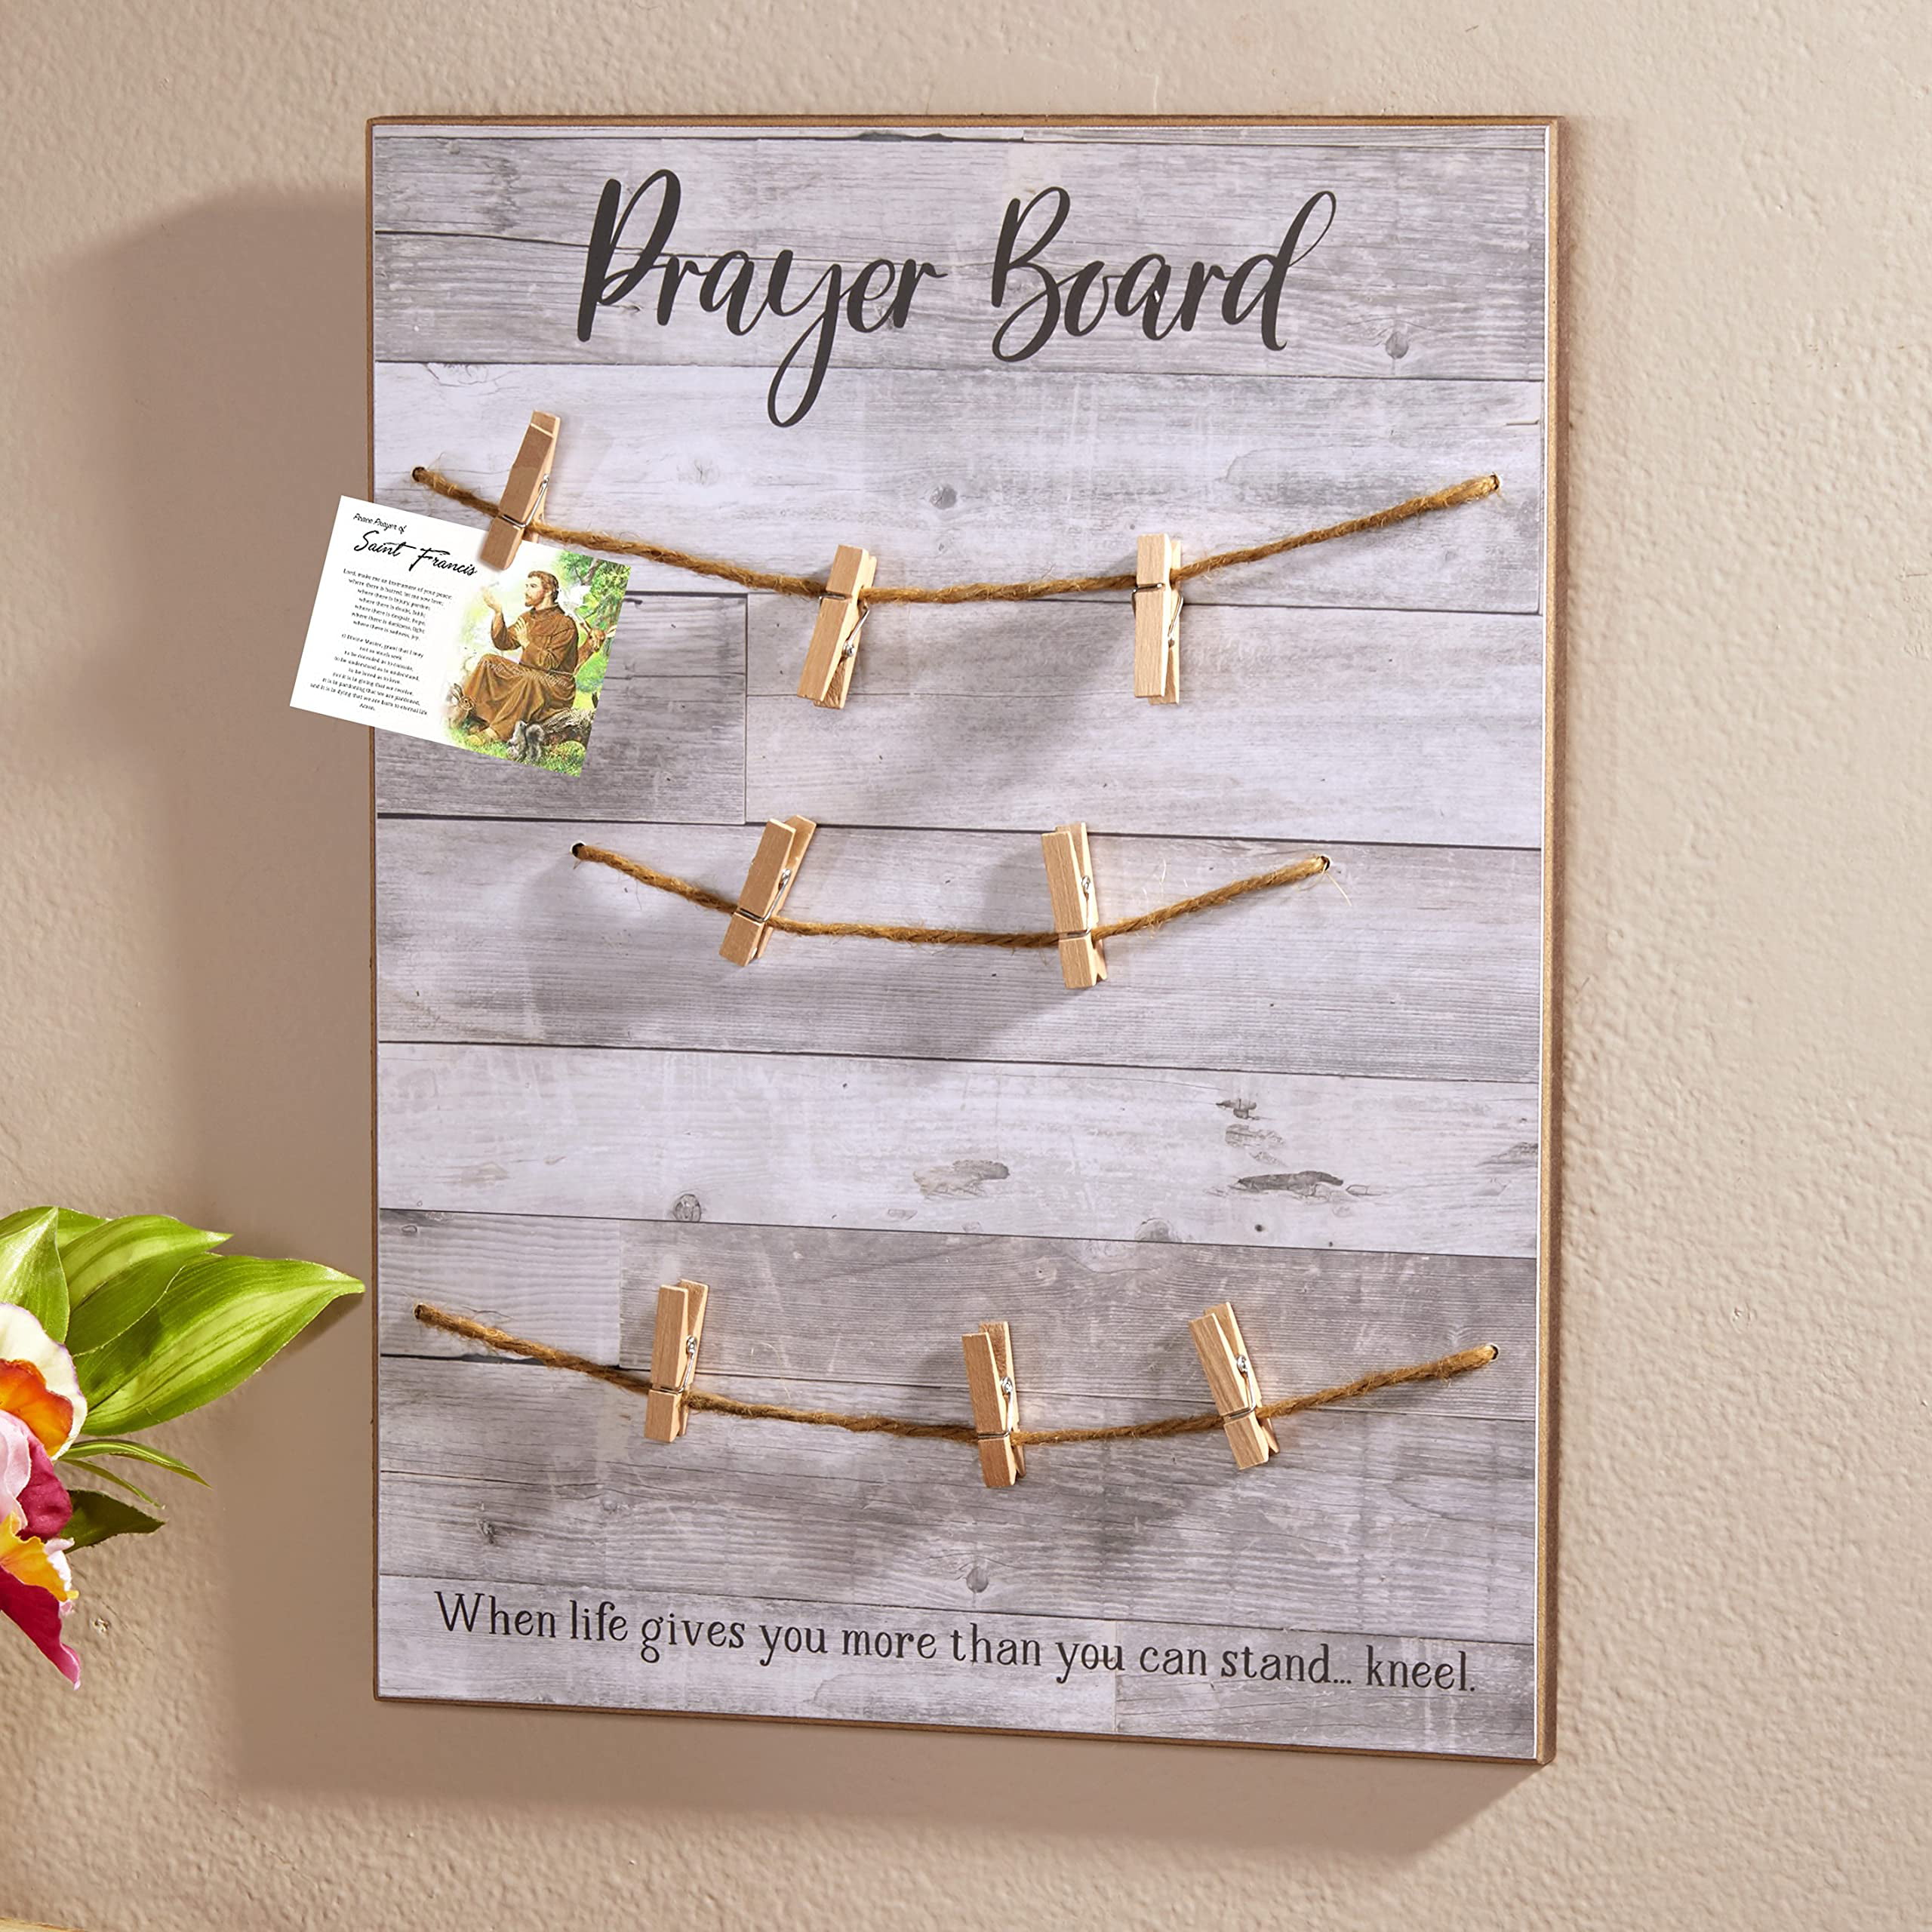 Wall Hanging Prayer Reminder Board with Prayer Notes Clips for Sharing